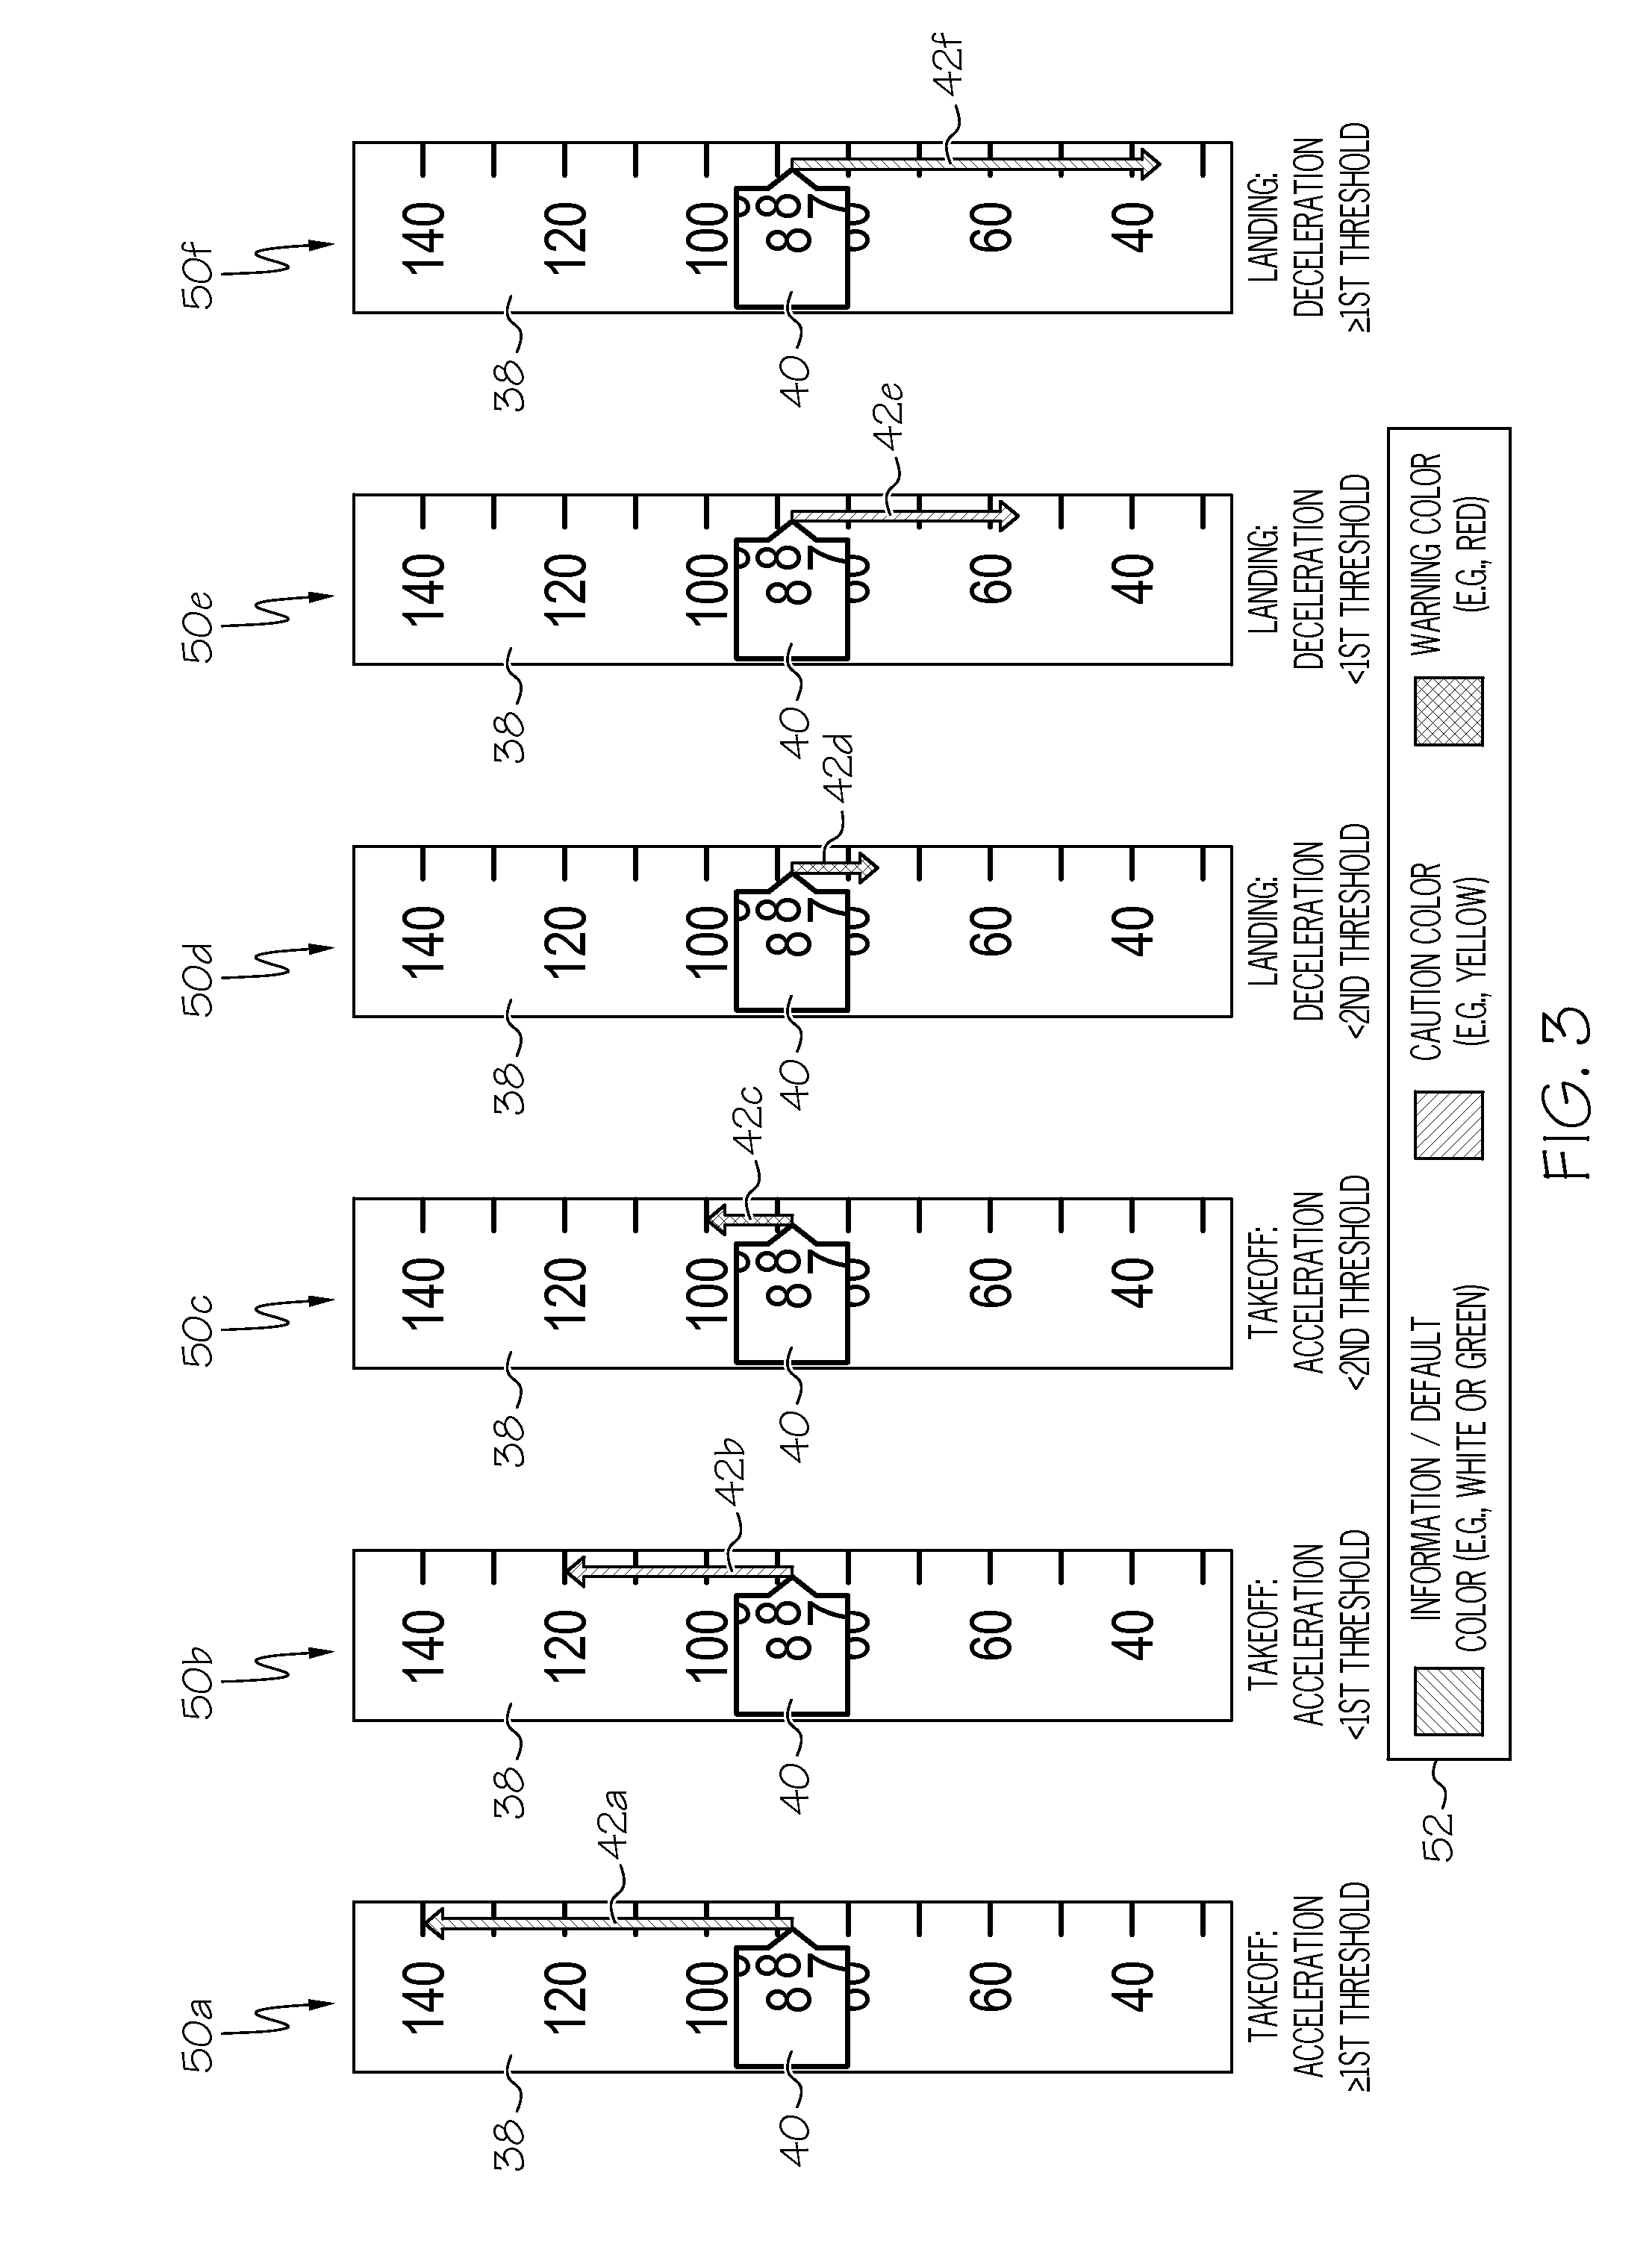 Flight deck display systems and methods for visually indicating low speed change conditions during takeoff and landing